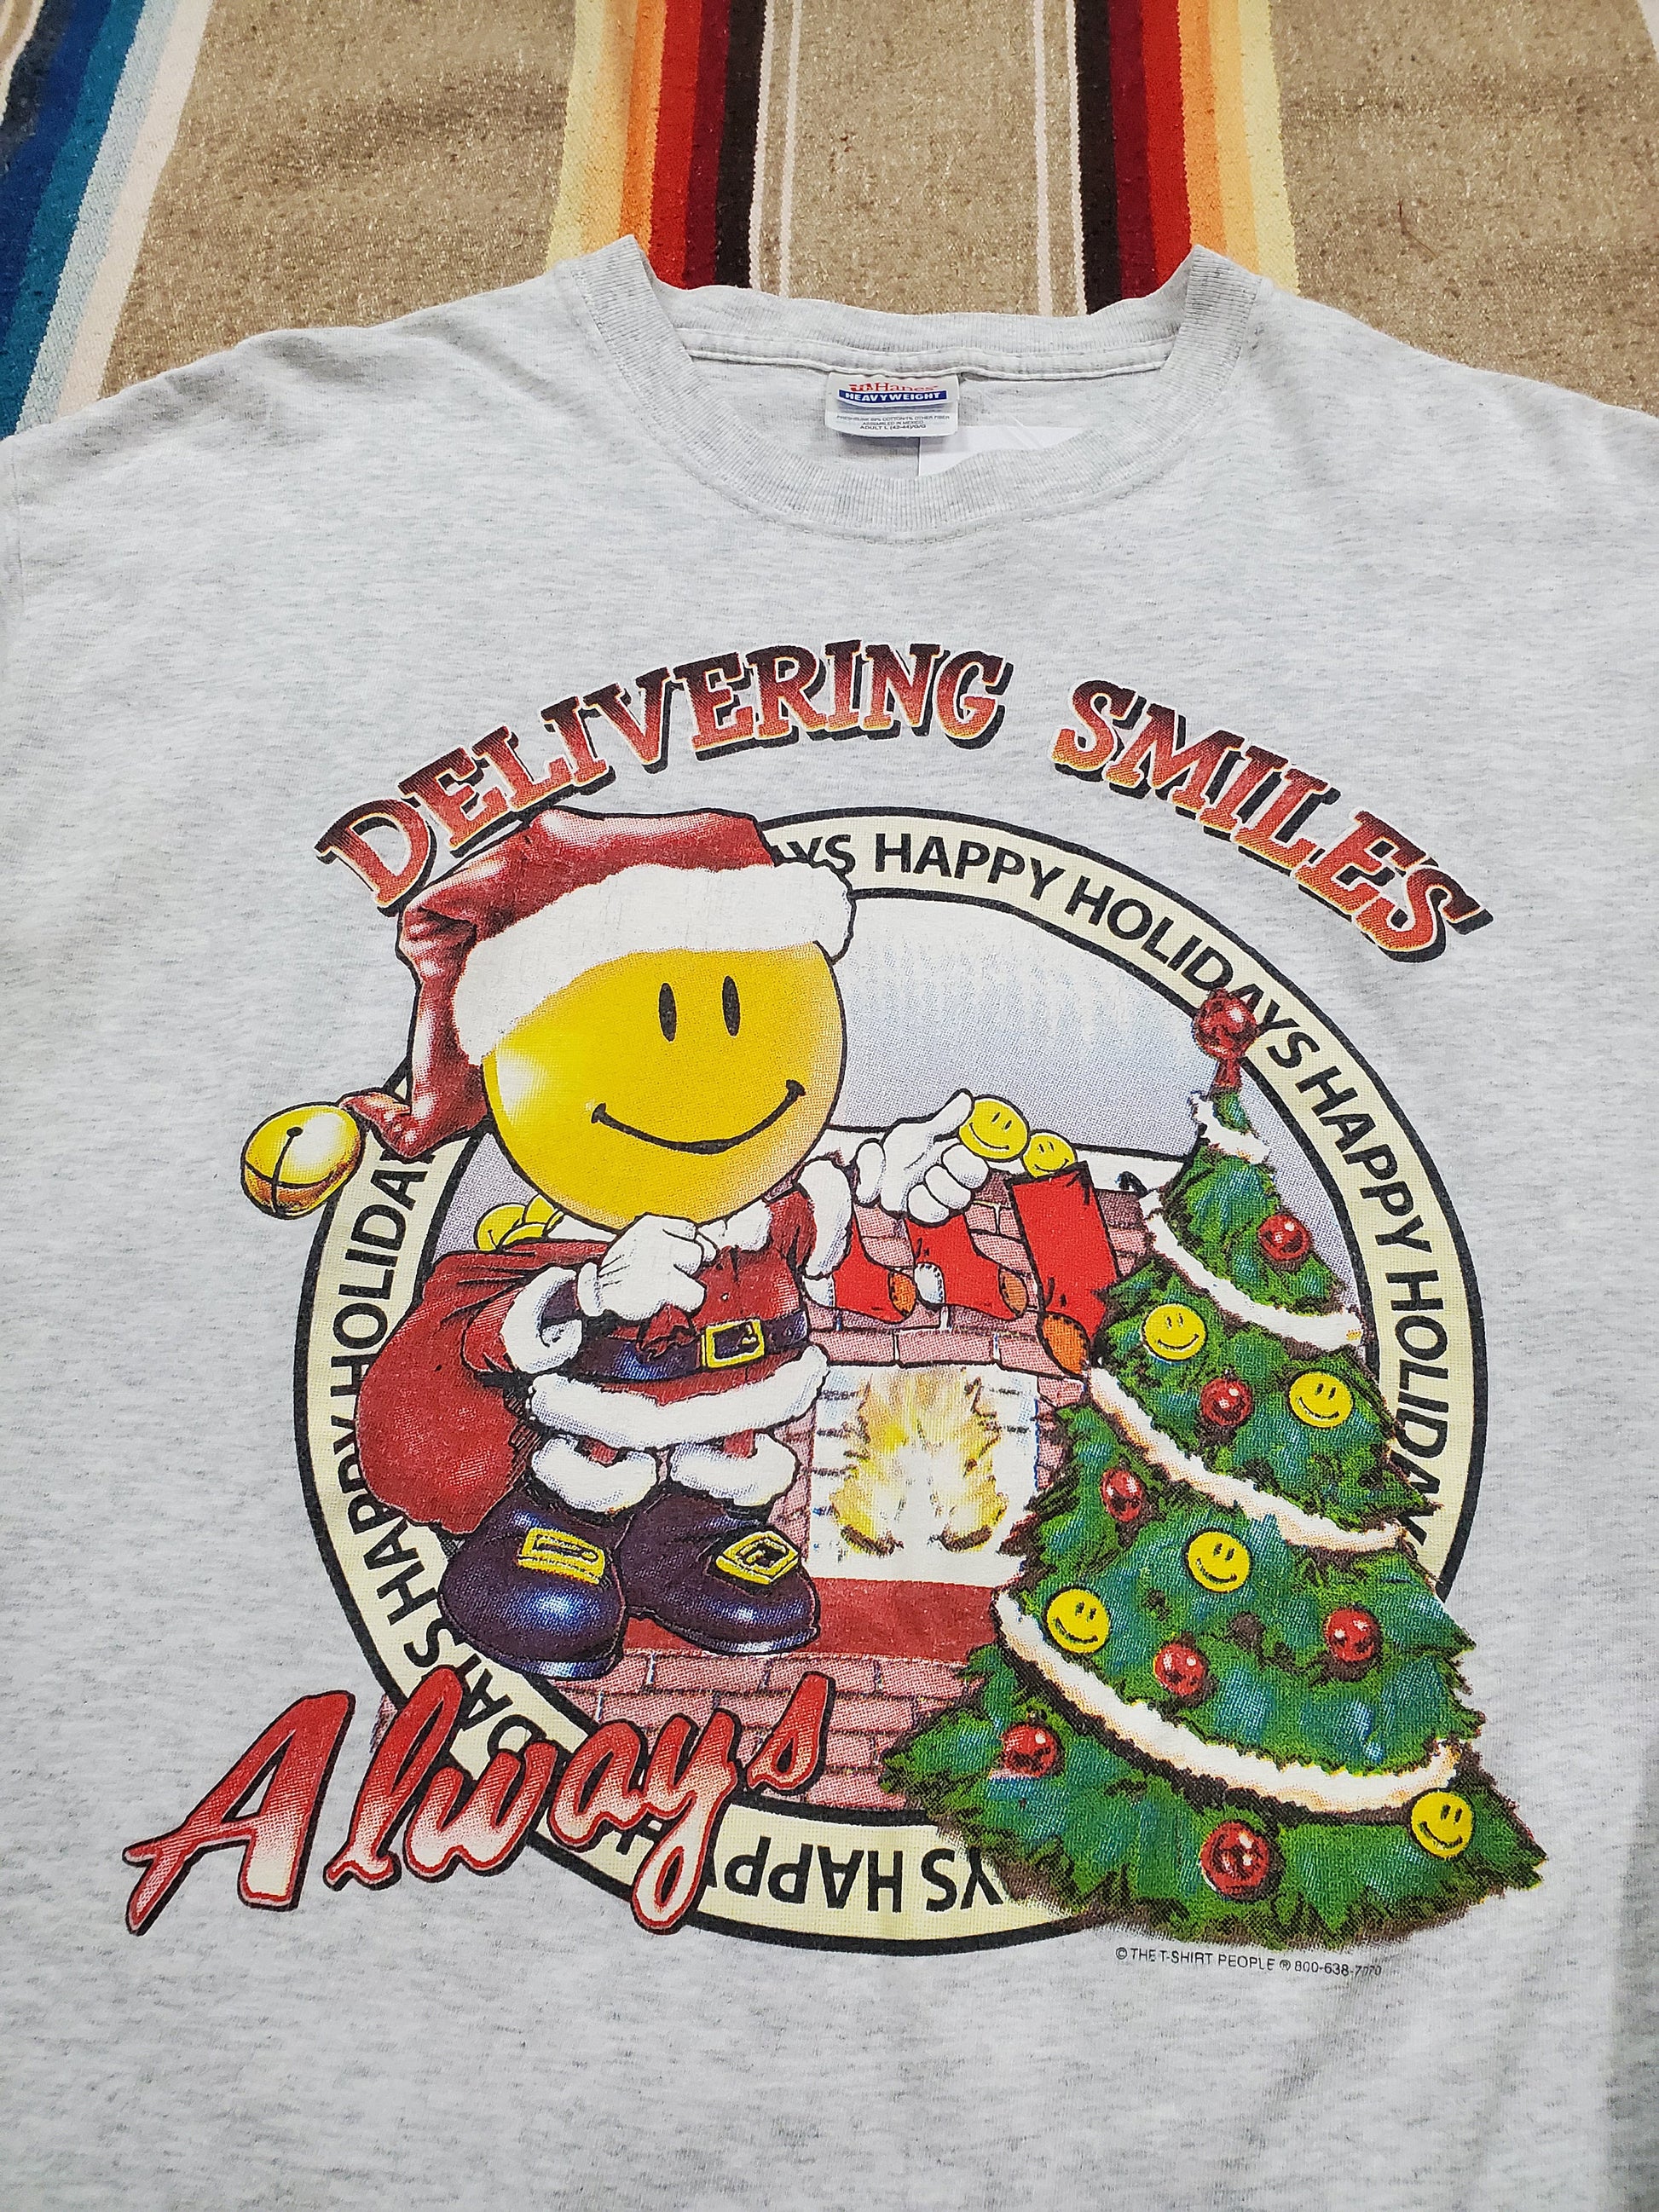 1990s/2000s Hanes Delivering Smiles Happy Holidays Christmas Longsleeve T-Shirt Size L